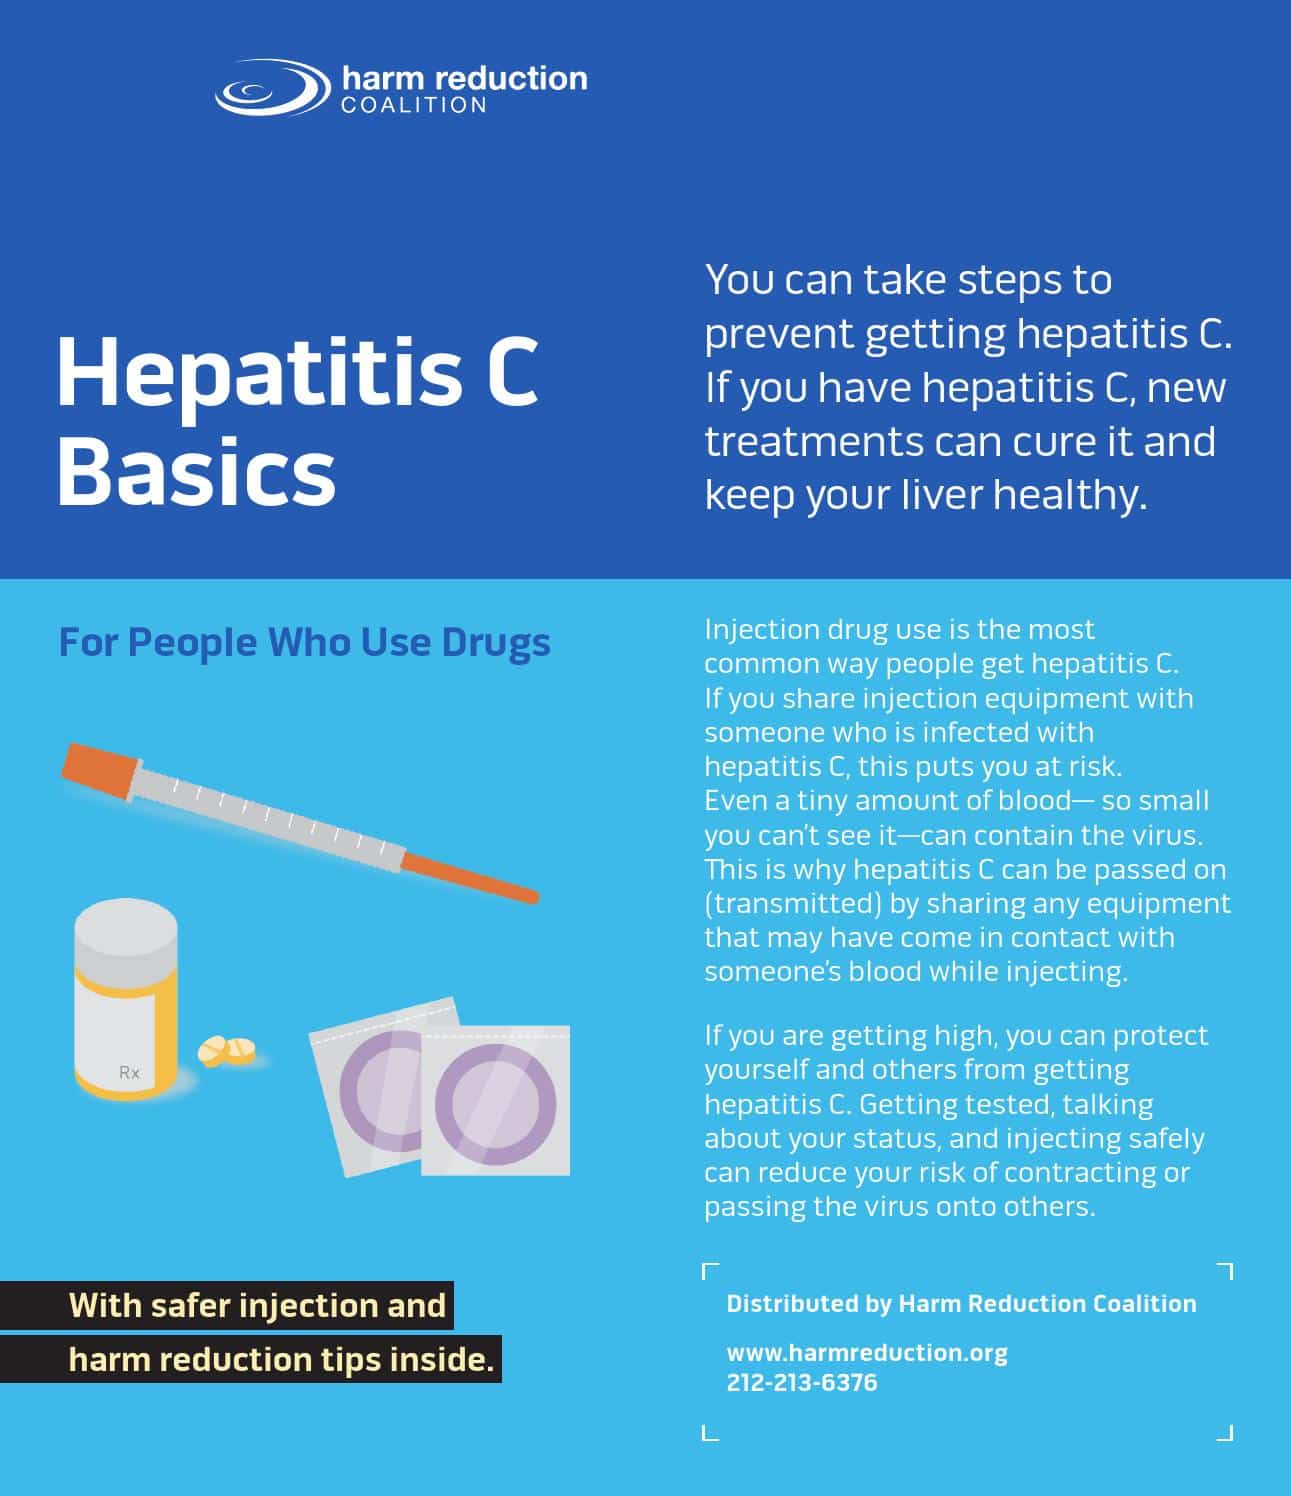 Can Chronic Hepatitis C Be Cured